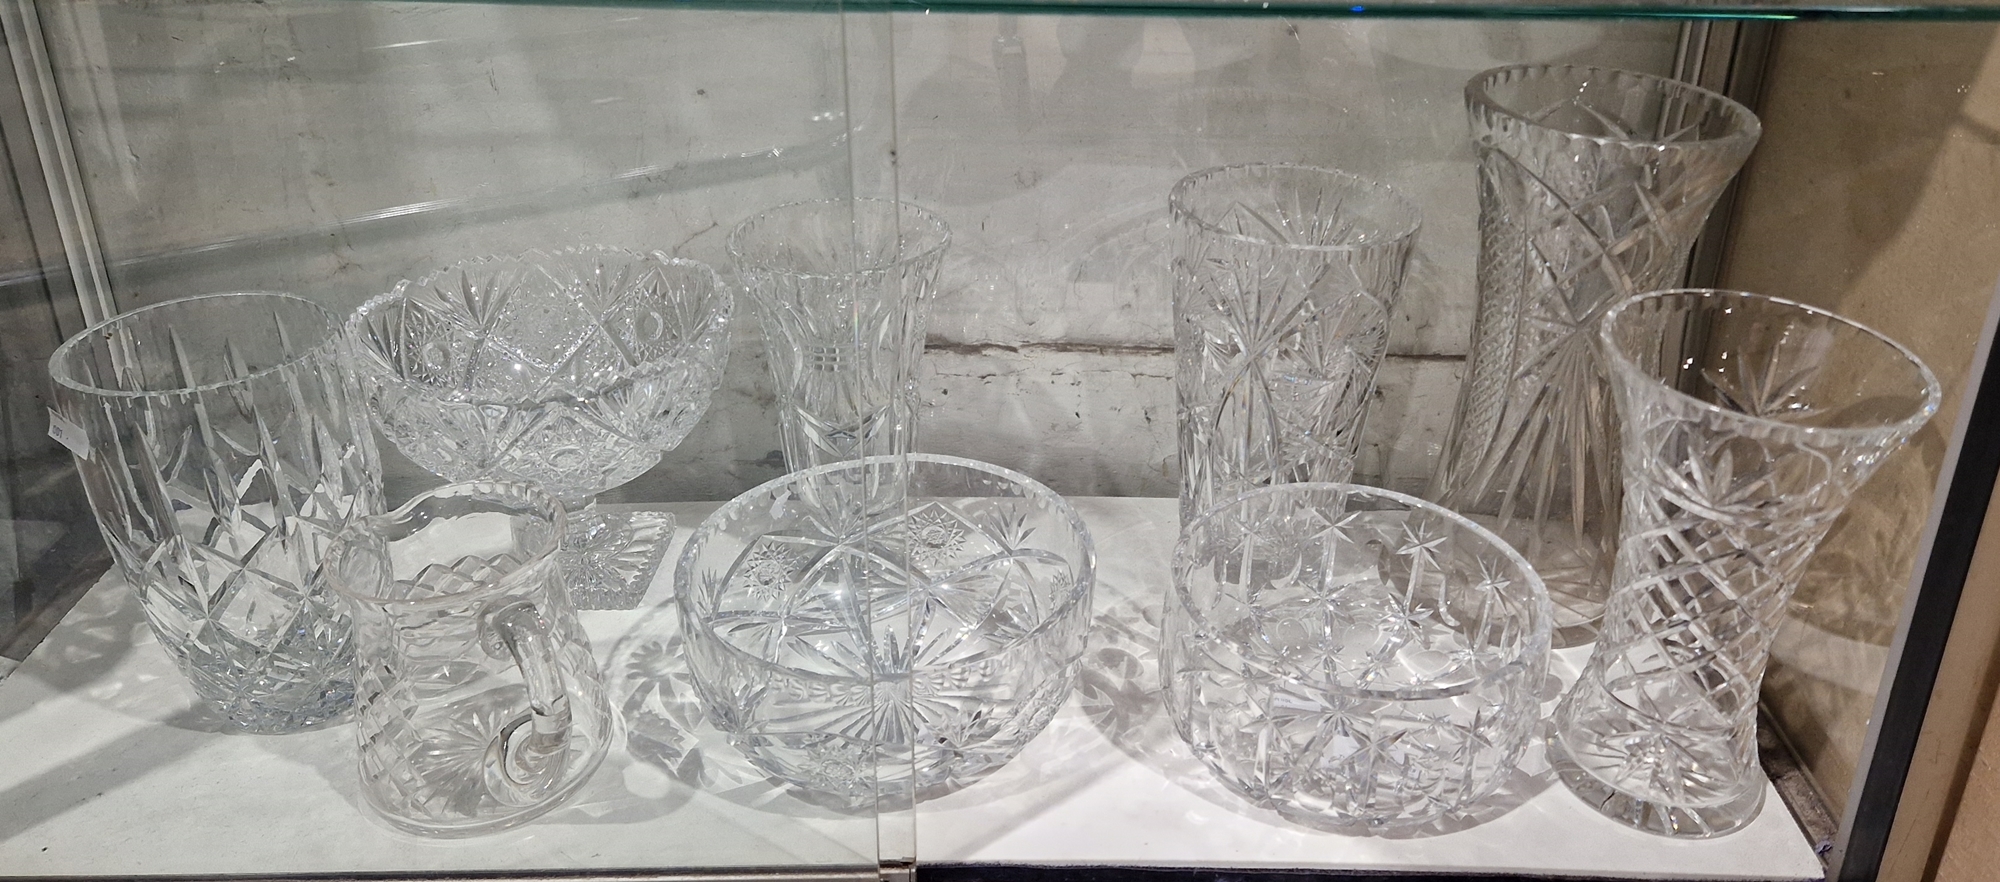 Assorted cut glass flower vases in sizes, a footed bowl, two other bowls and a water jug - Image 3 of 3